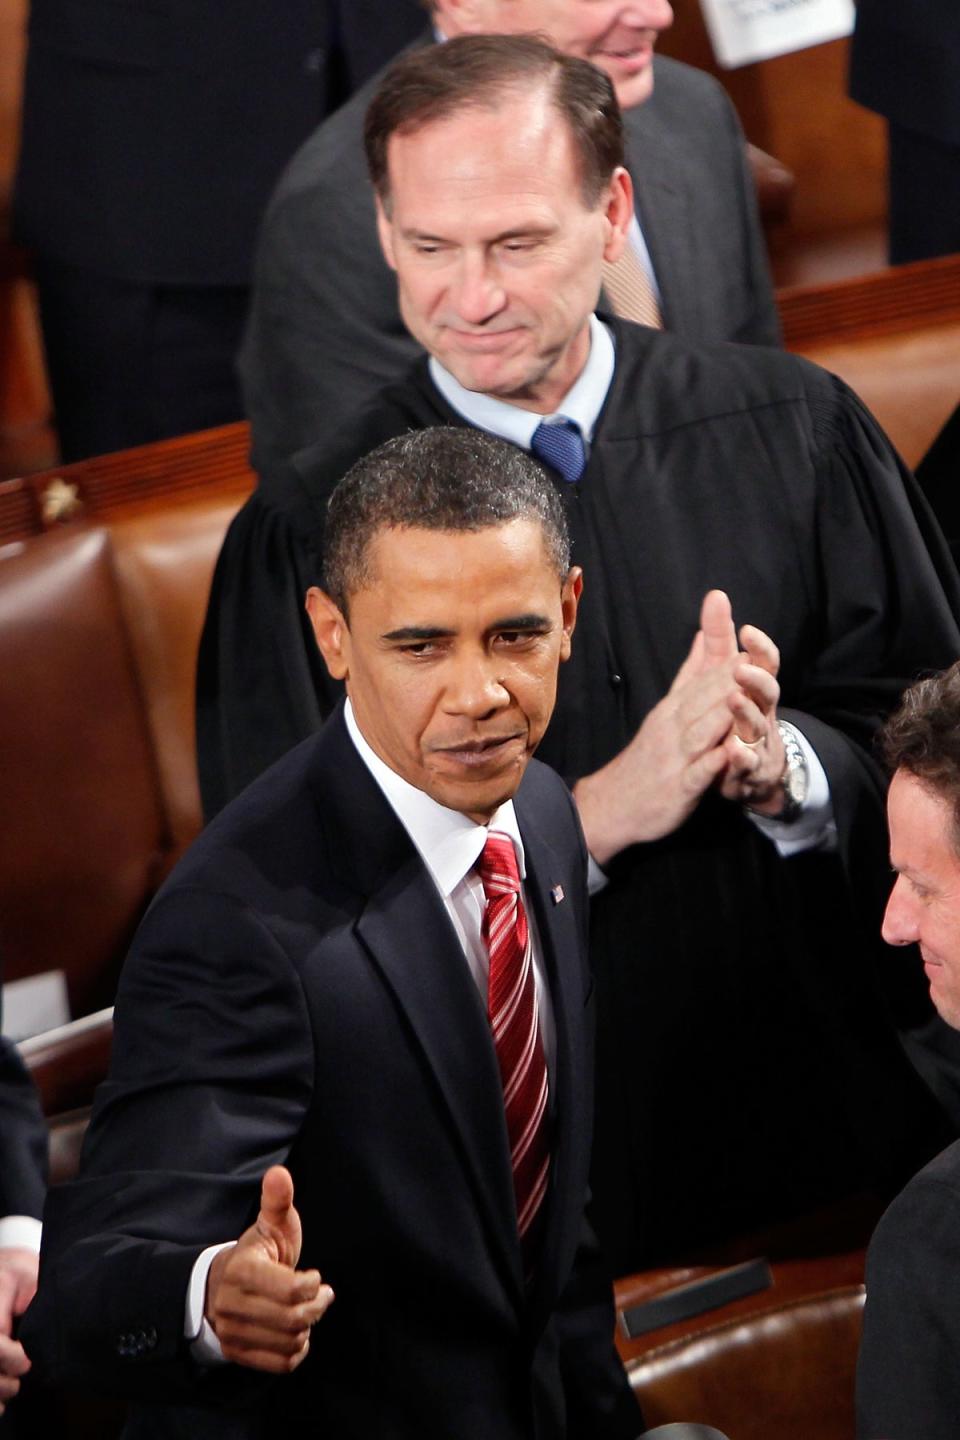 Supreme Court Justice Samuel Alito looks on on as U.S. President Barack Obama enters the chamber before speaking to both houses of Congress during his first State of the Union address (Getty Images)